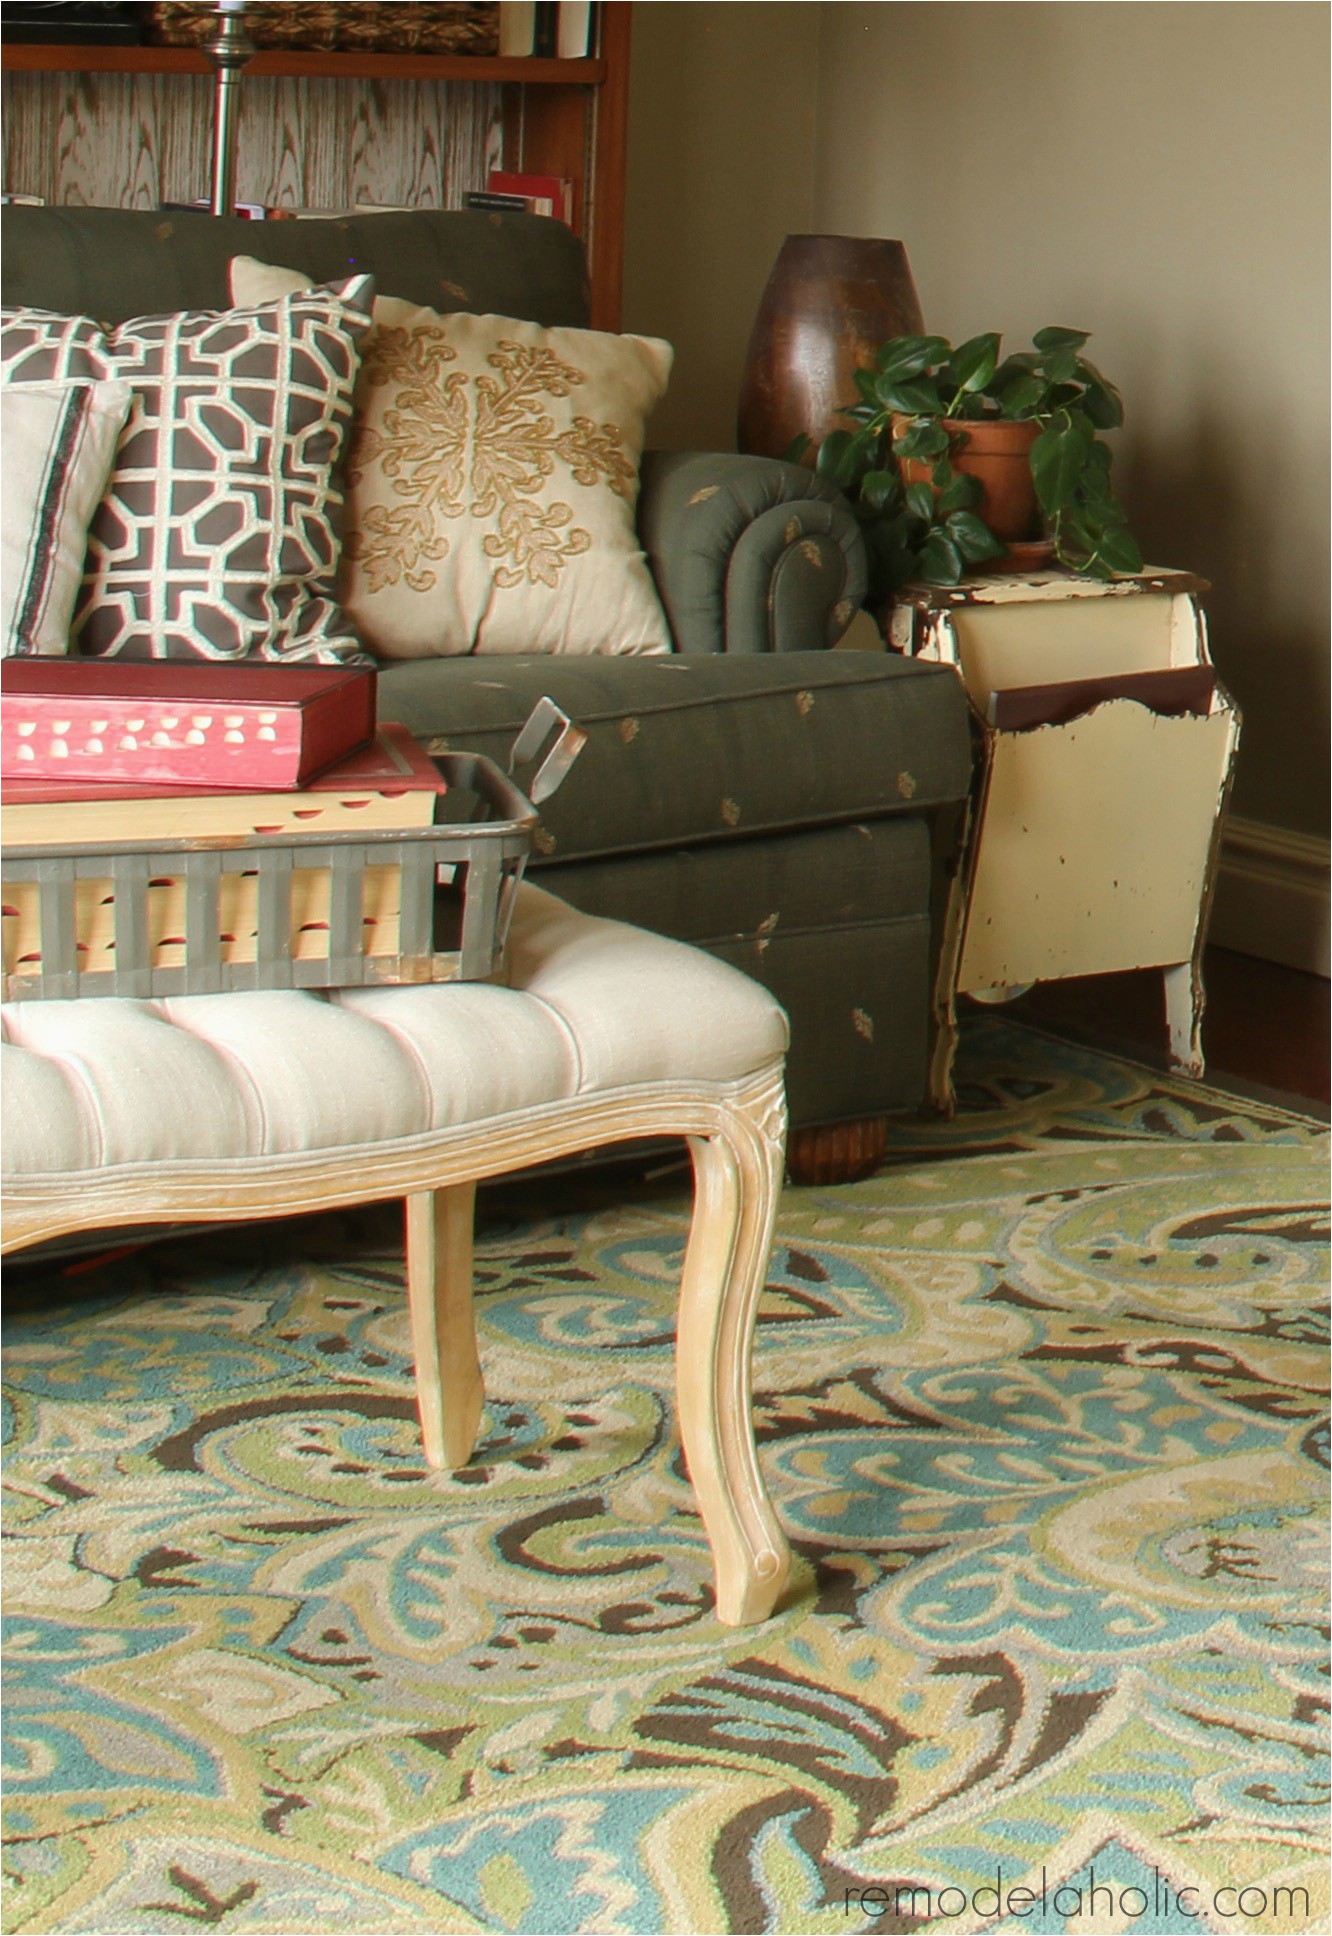 Large area Rugs at Big Lots Living Room area Rug Placement Big Lots Rugs Along Layout